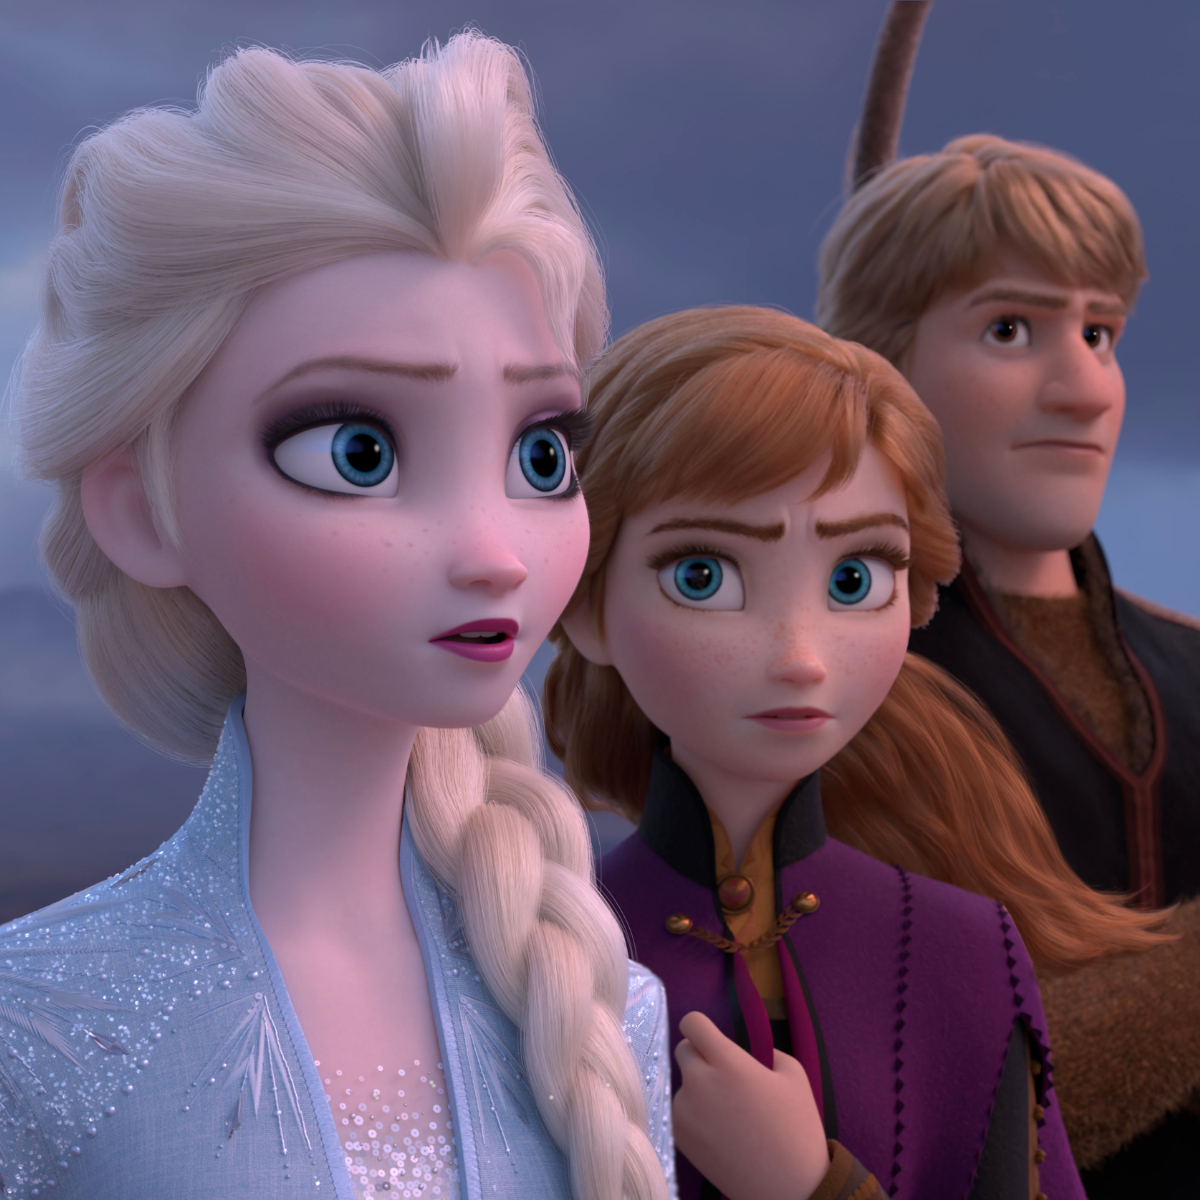 Frozen 2 Movie Review: Idina Menzel, Kristen Bell's film treads on thin ice yet delivers a visual extravaganza